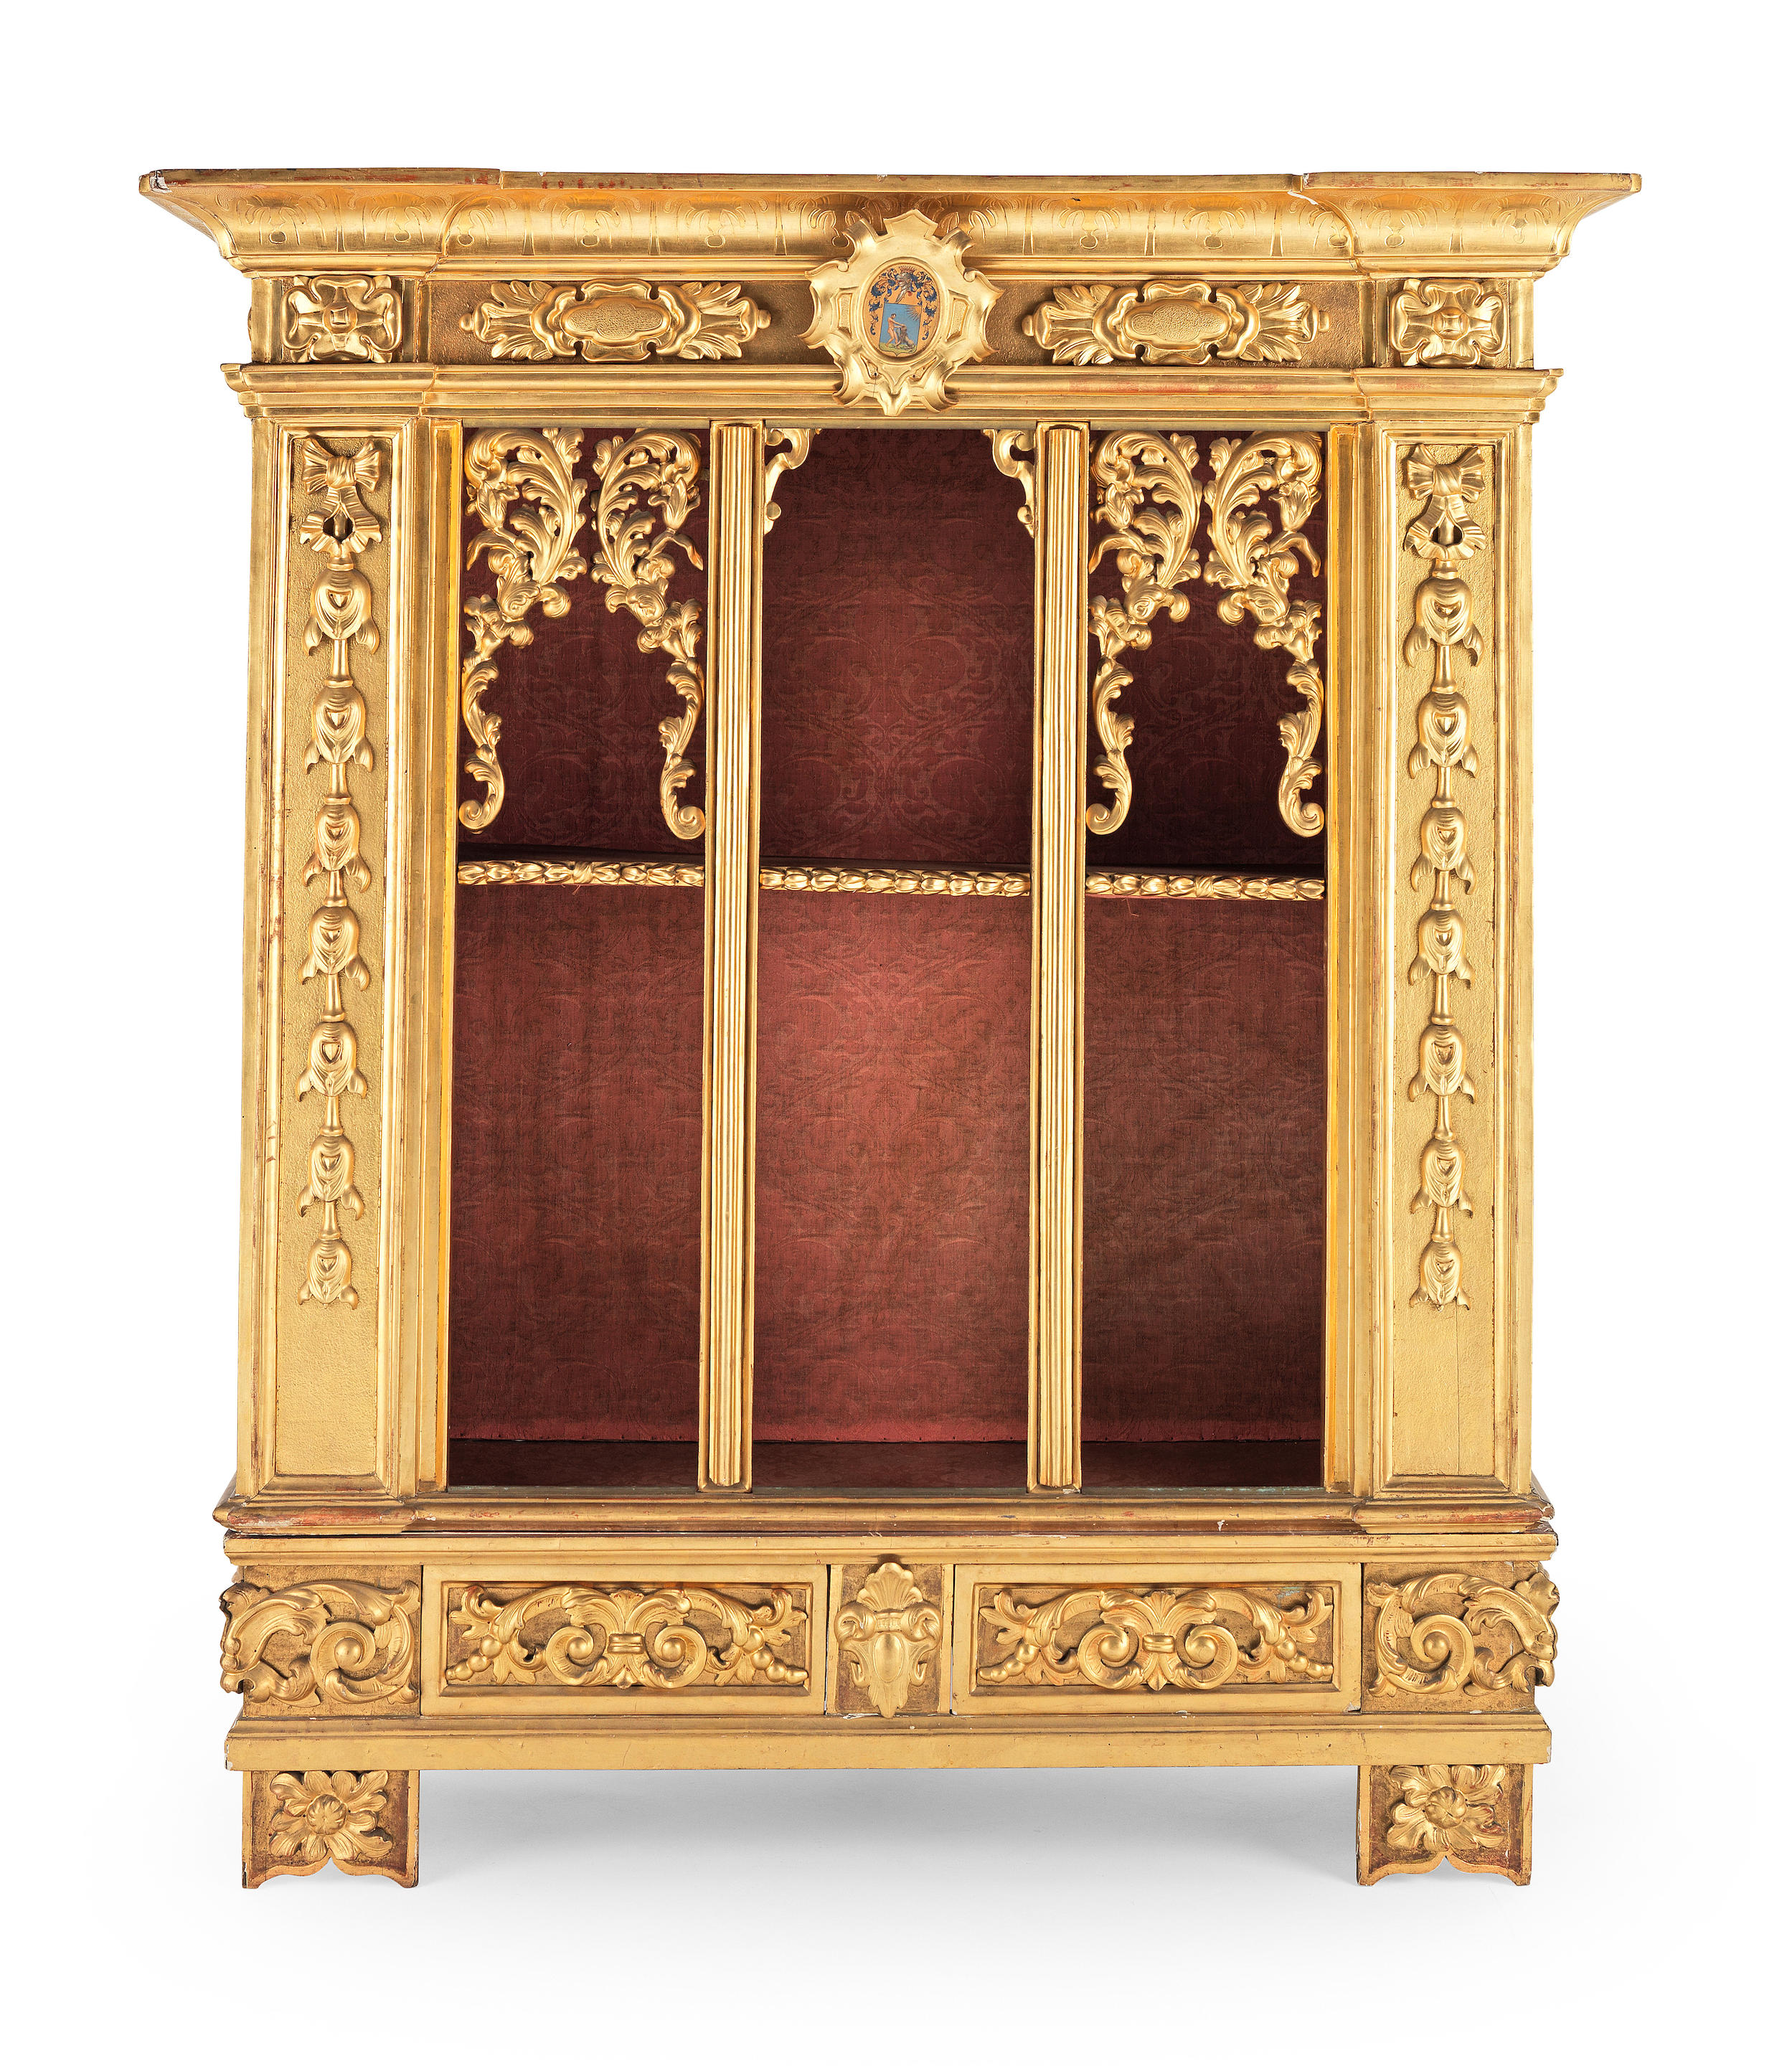 An Italian second quarter 19th century giltwood and gilt gesso display cabinet